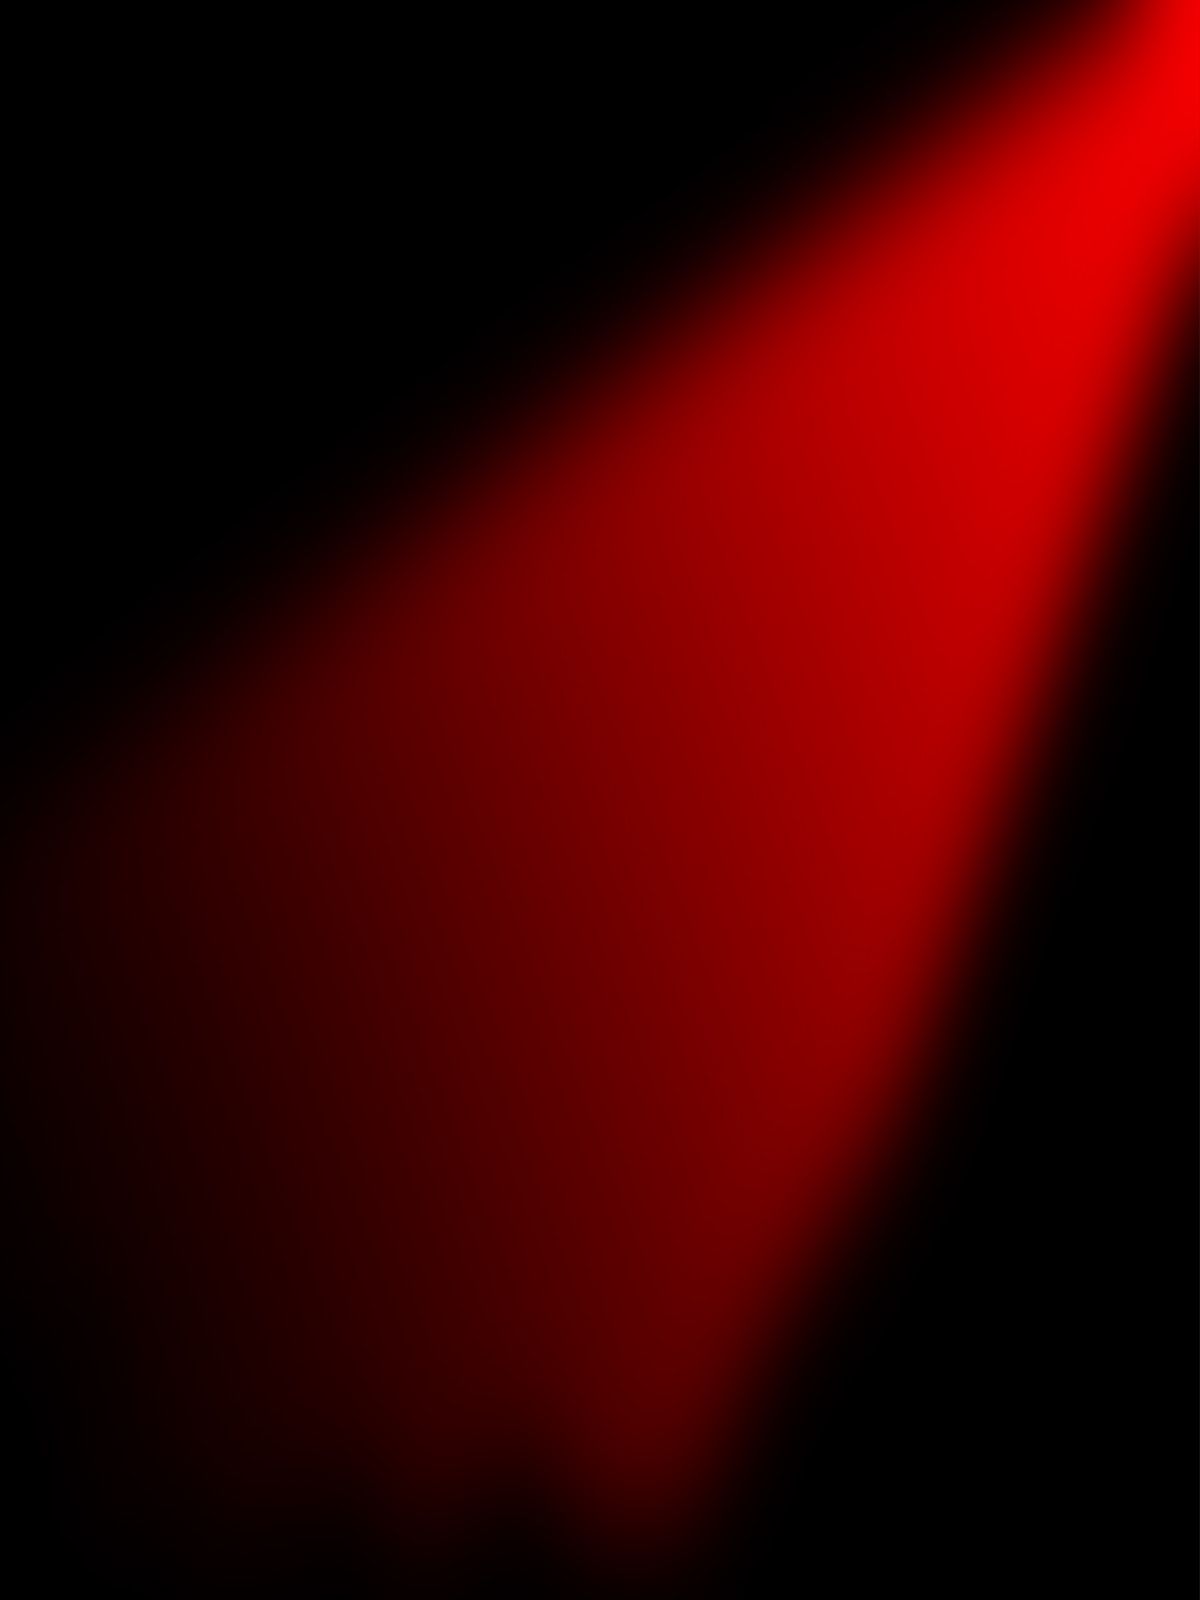 Free download Red and Black Wallpaper red and black wallpaper Widescreen [1200x1600] for your Desktop, Mobile & Tablet. Explore Red Phone Wallpaper. Free Red Wallpaper, Cool Red Wallpaper, Black